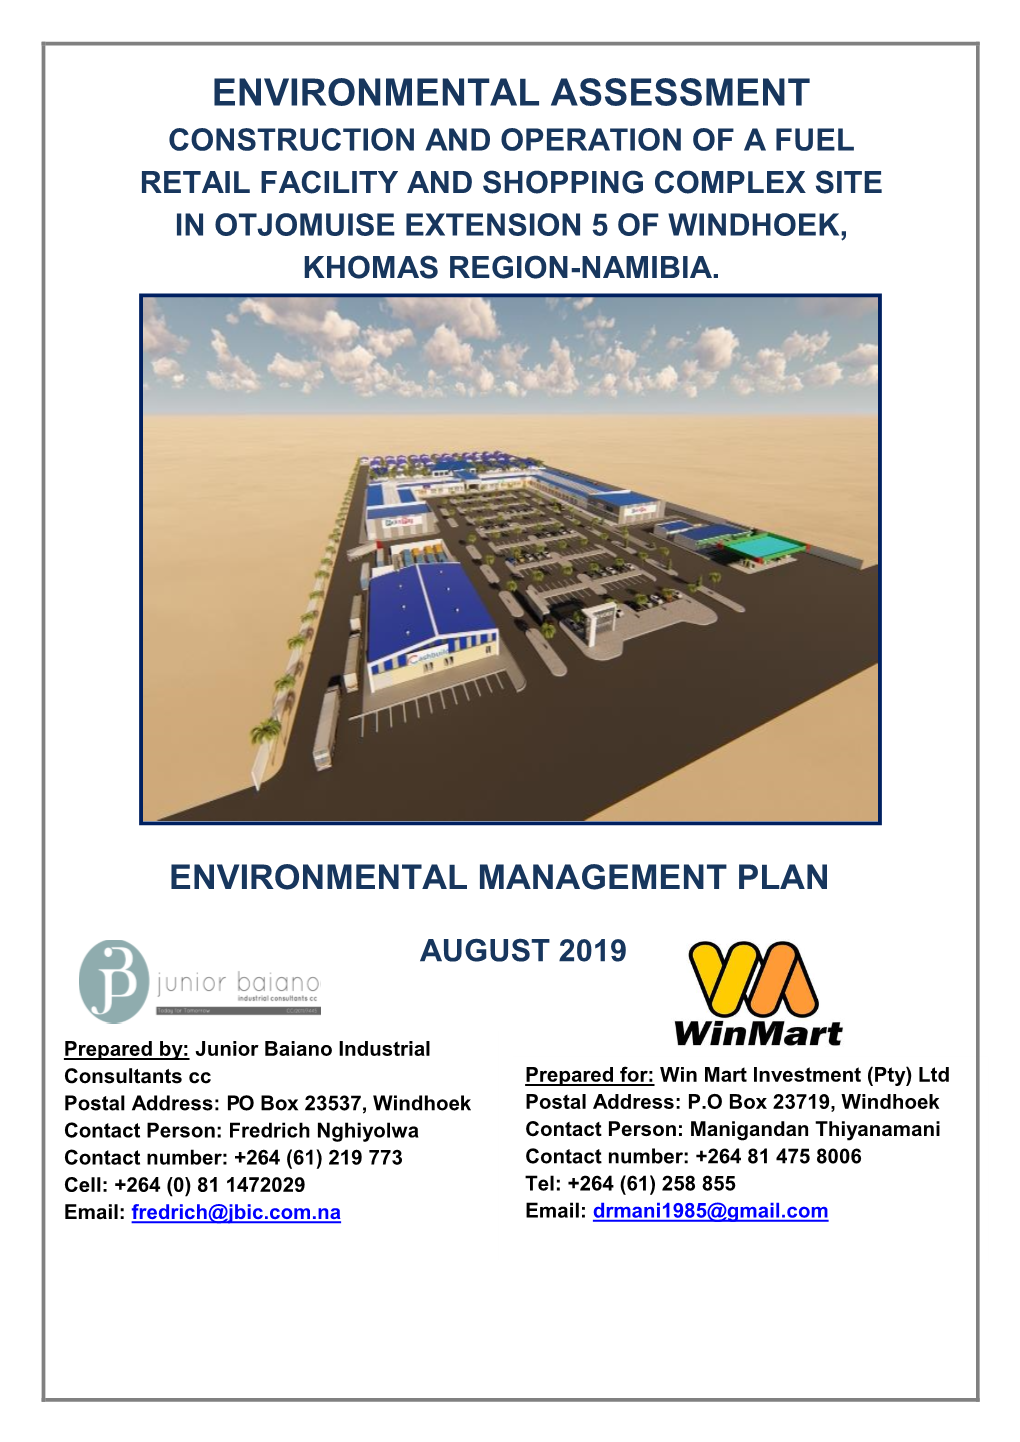 Environmental Assessment Construction and Operation of a Fuel Retail Facility and Shopping Complex Site in Otjomuise Extension 5 of Windhoek, Khomas Region-Namibia